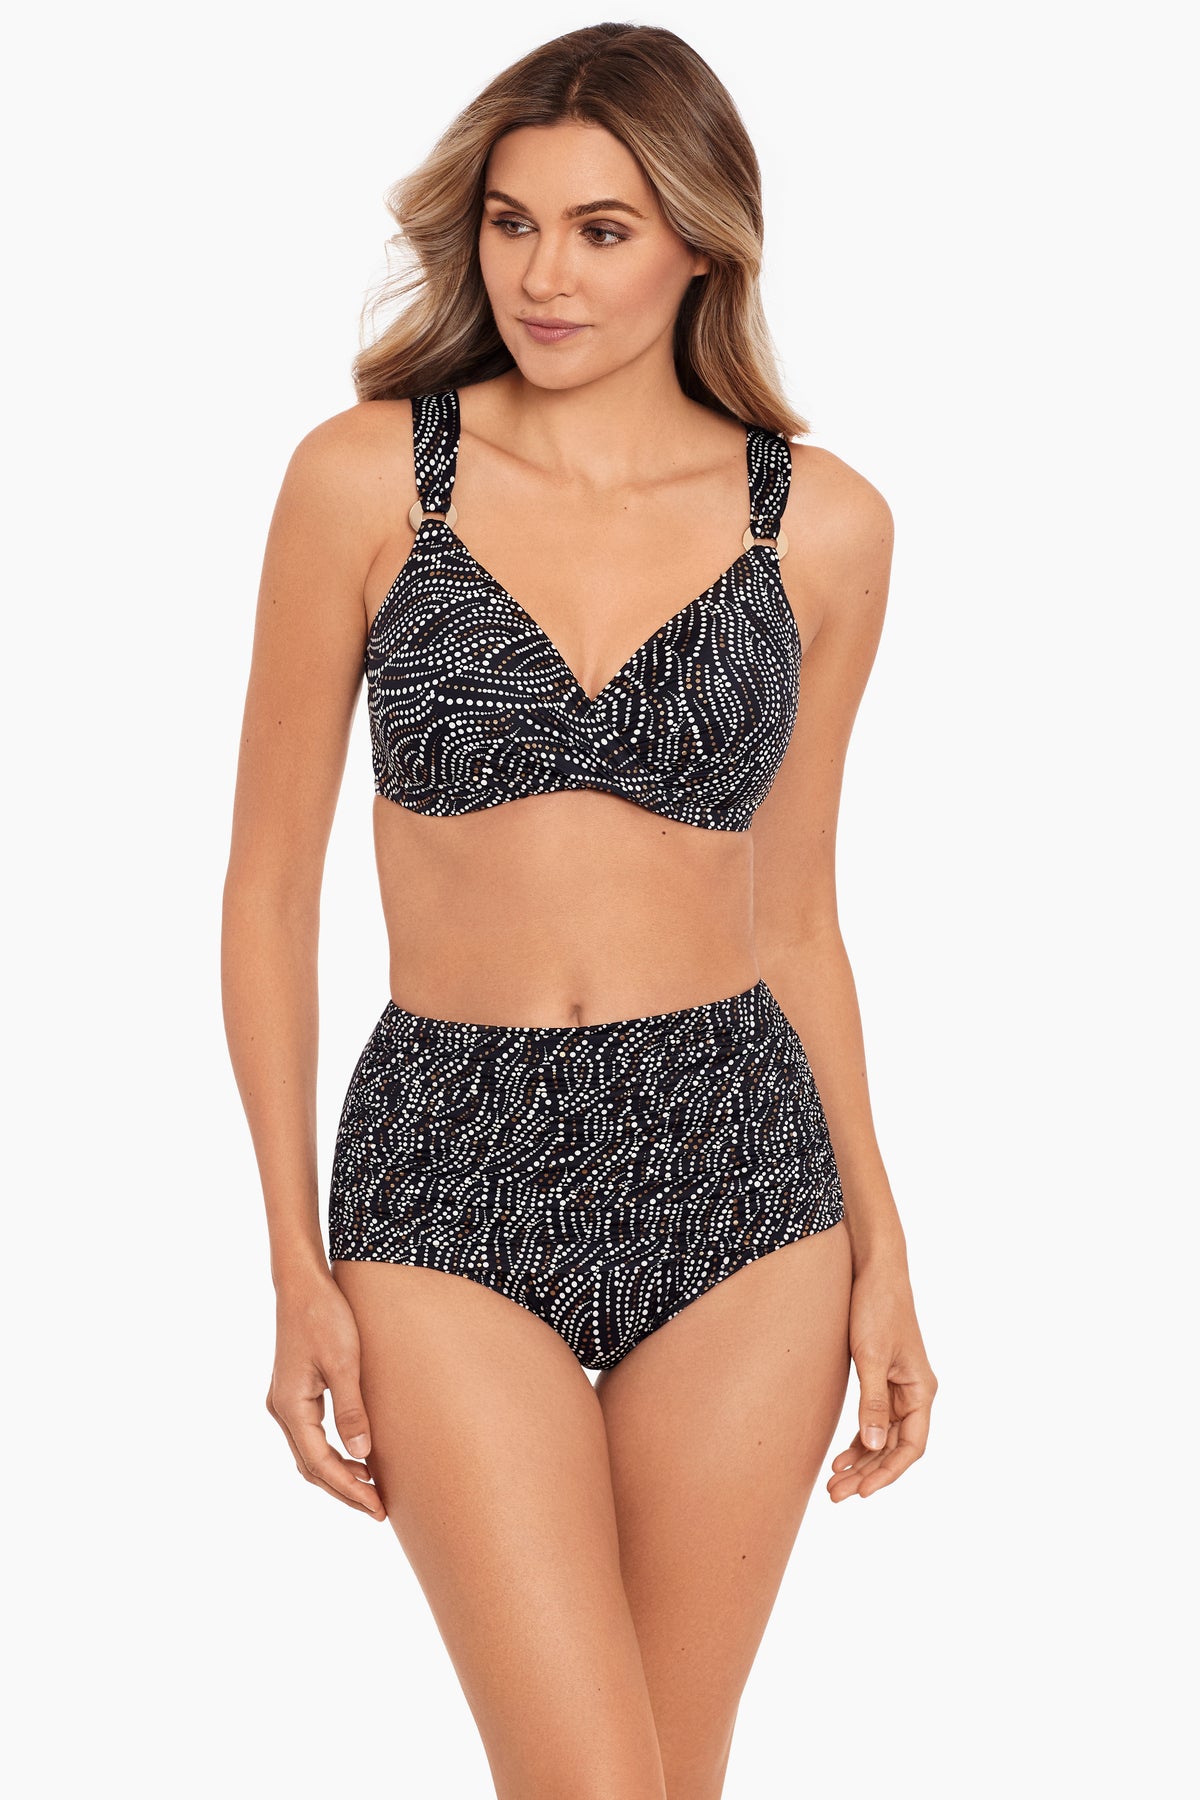 The Best Slimming Two Piece Swimwear Looks from Miraclesuit